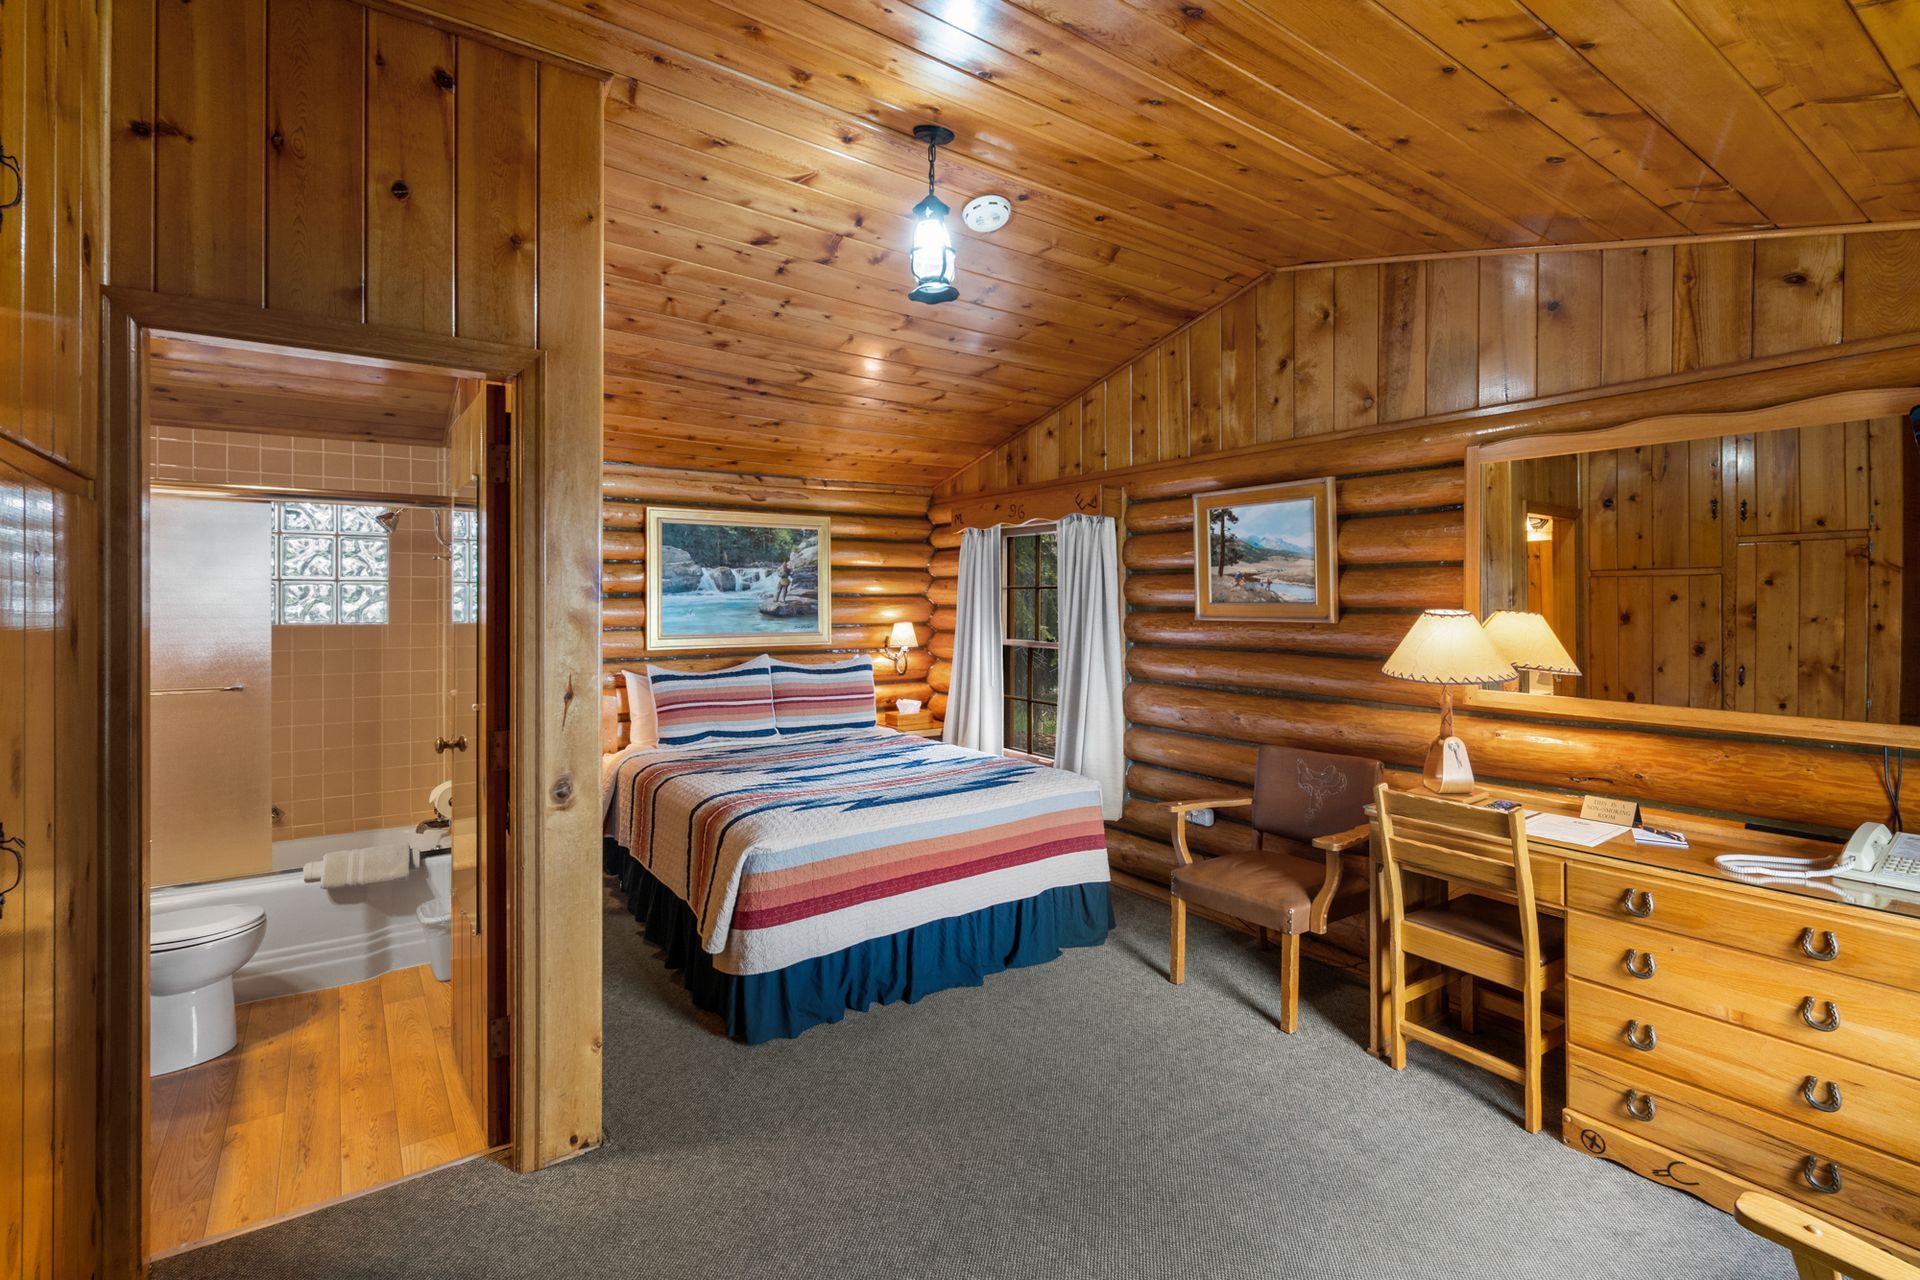 A bedroom in a log cabin with a king size bed and a bathroom.